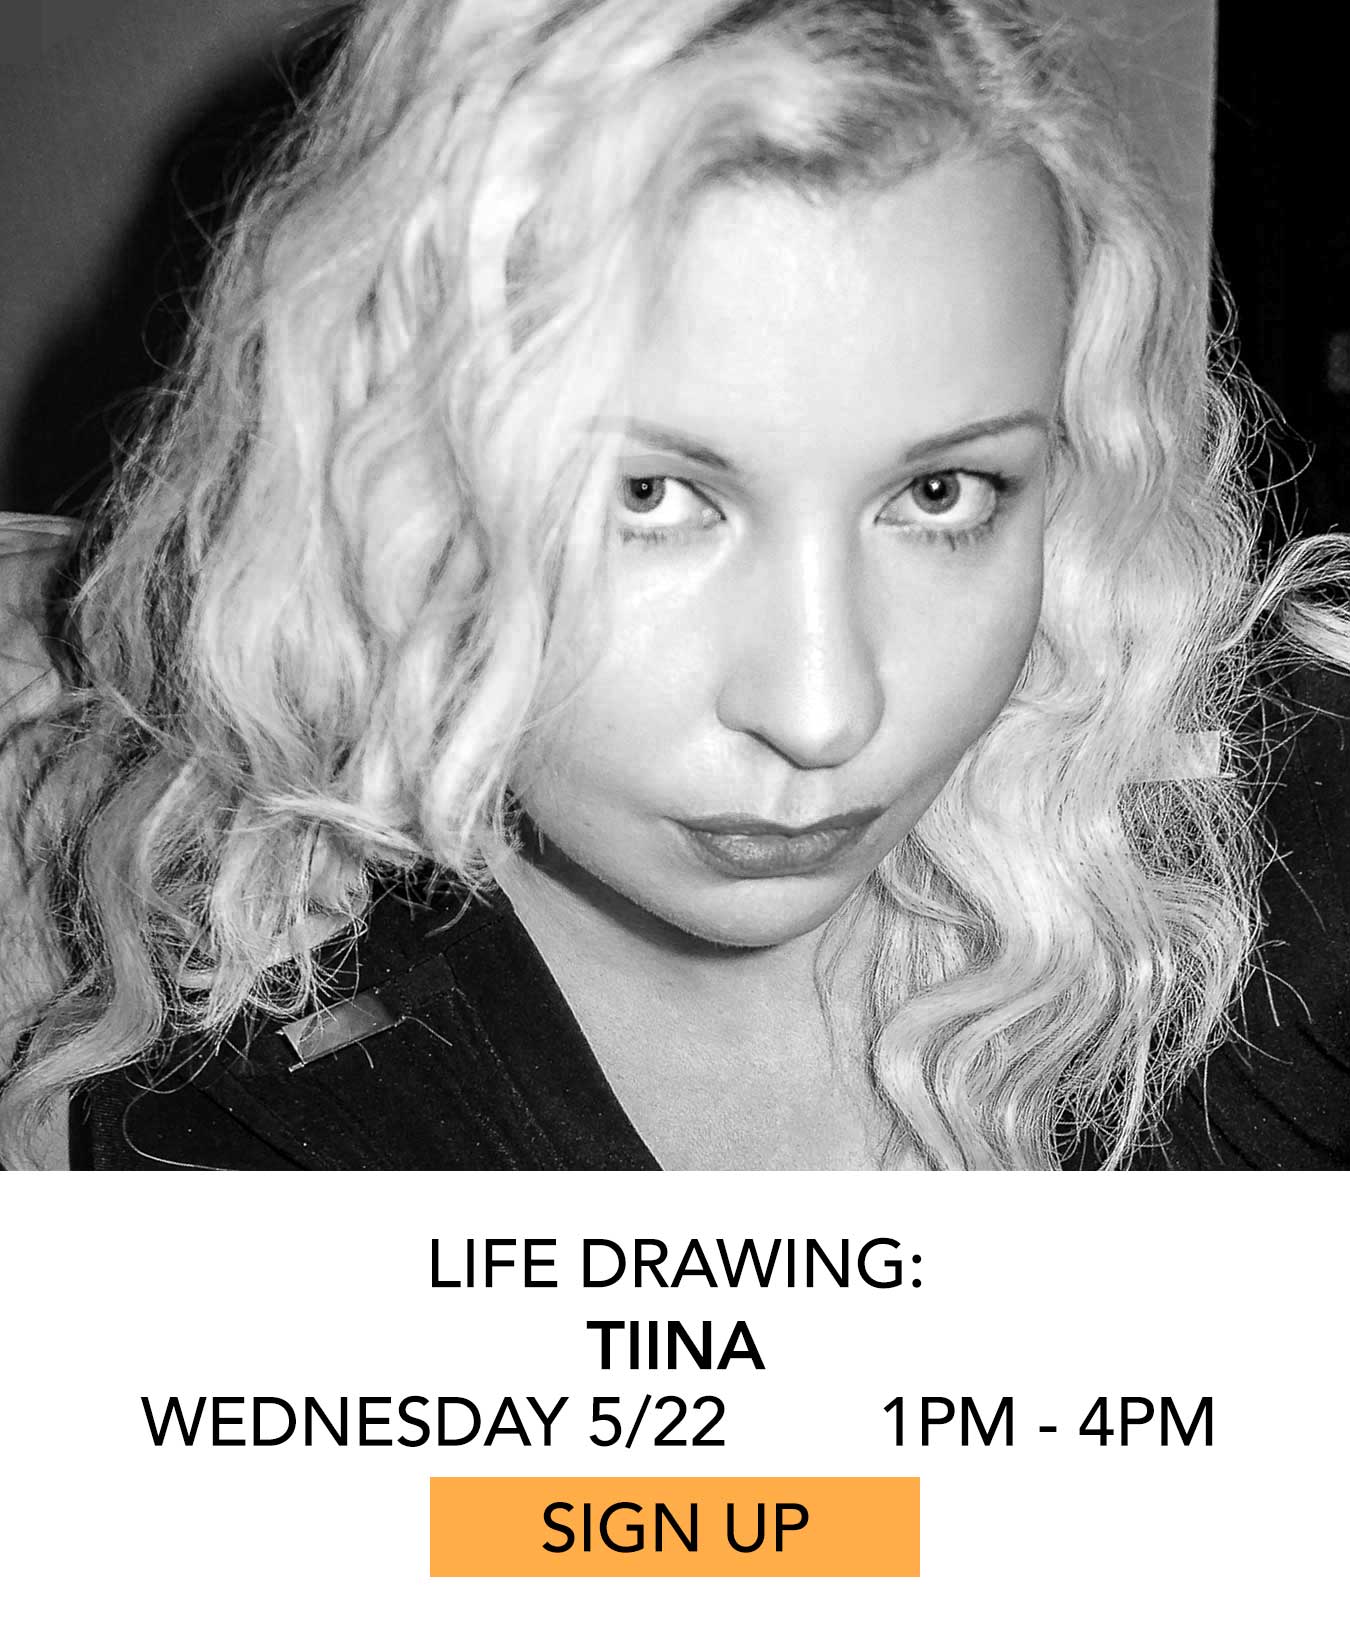 Life Drawing: Tiina. Wednesday 5/22 from 1pm to 4pm. Click to Sign Up.